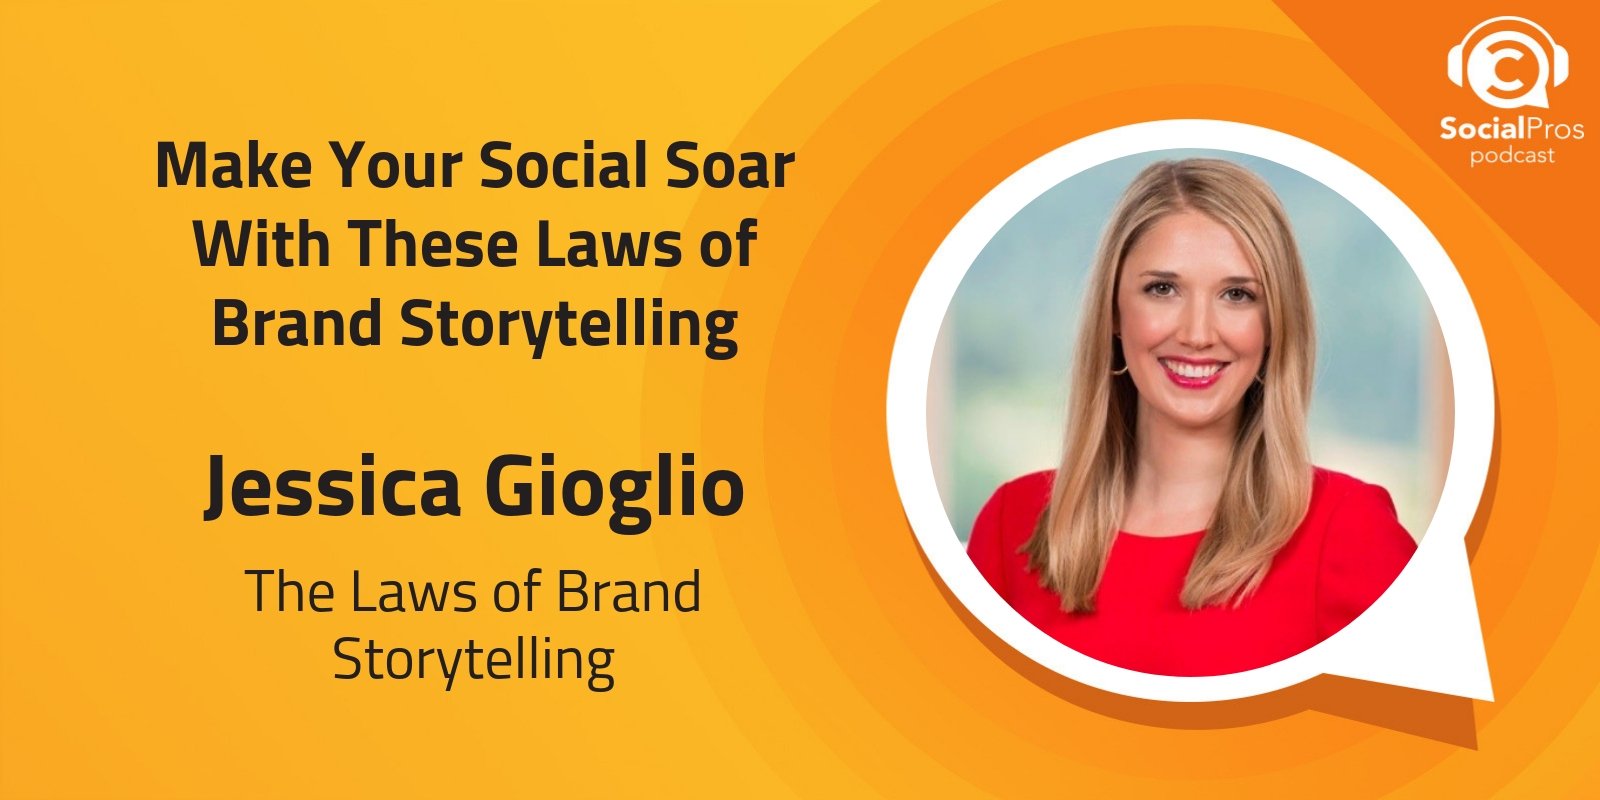 Make Your Social Soar With These Laws of Brand Storytelling